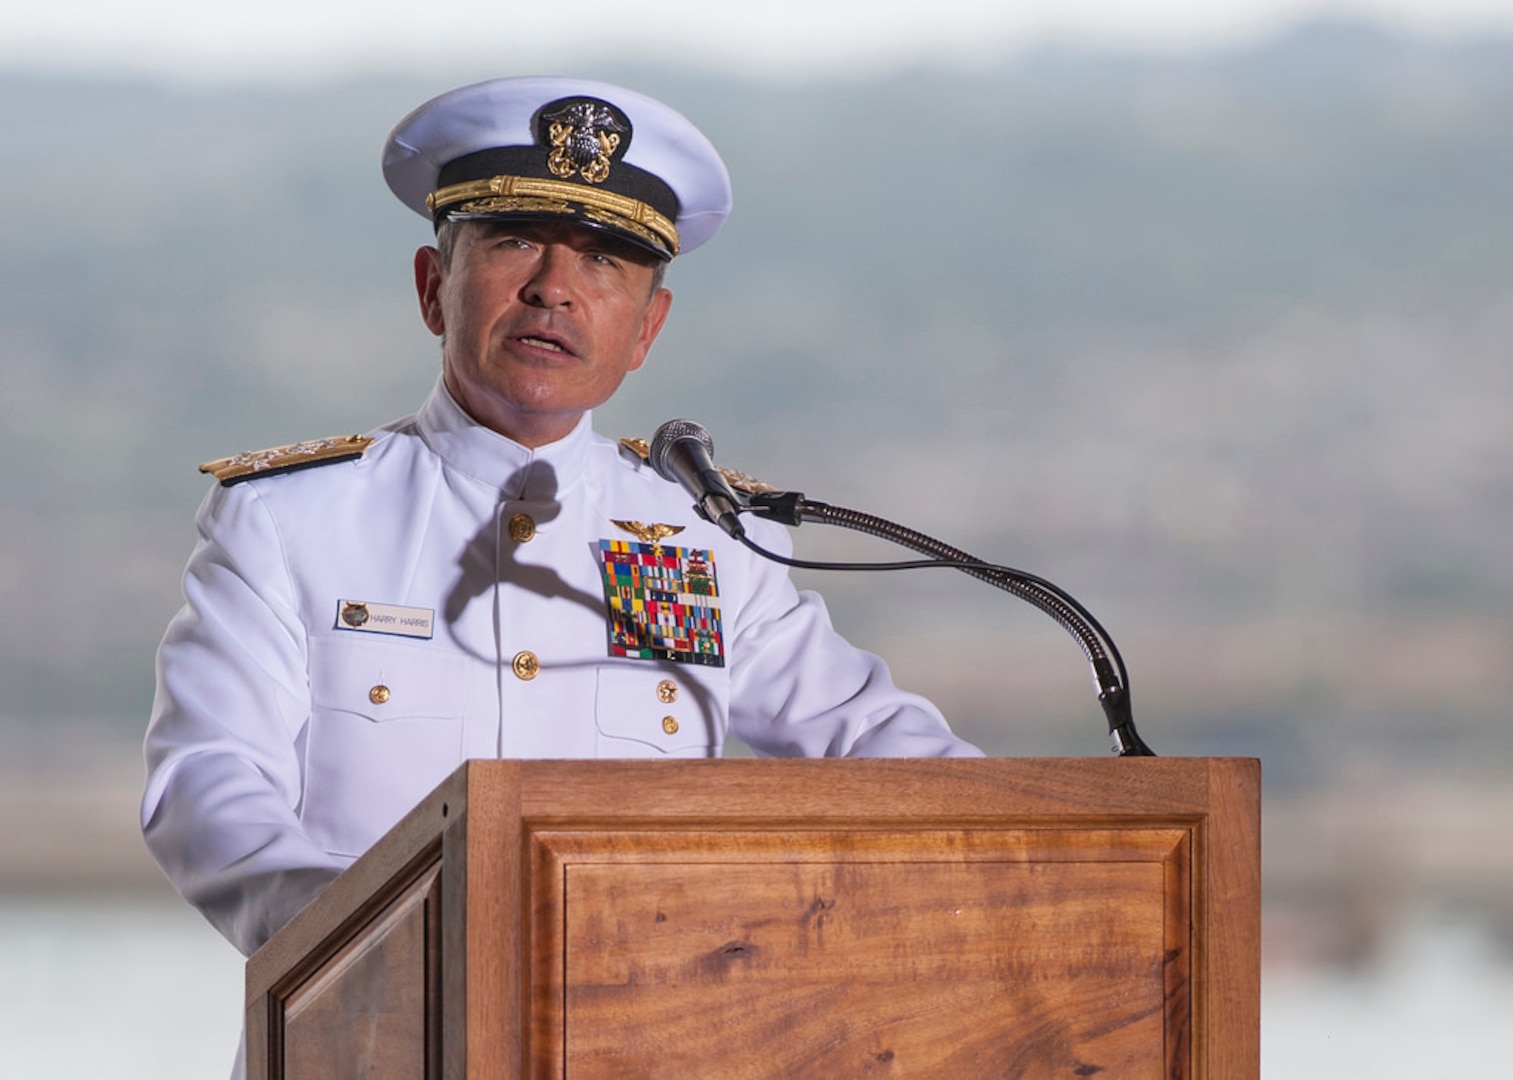 PEARL HARBOR (Dec. 7, 2015) Adm. Harry Harris, commander of U.S. Pacific Command, delivers remarks during the 74th National Pearl Harbor Remembrance Day ceremony at Joint Base Pearl Harbor-Hickam, Hawaii. The National Park Service and U.S. Navy co-hosted the ceremony, which featured Pulitzer Prize-winning historian Dr. David Kennedy as the keynote speaker and provided veterans, family members, and the community a chance to honor the sacrifices made by those who fought and lost their lives during the attack on Pearl Harbor 74 years ago. 